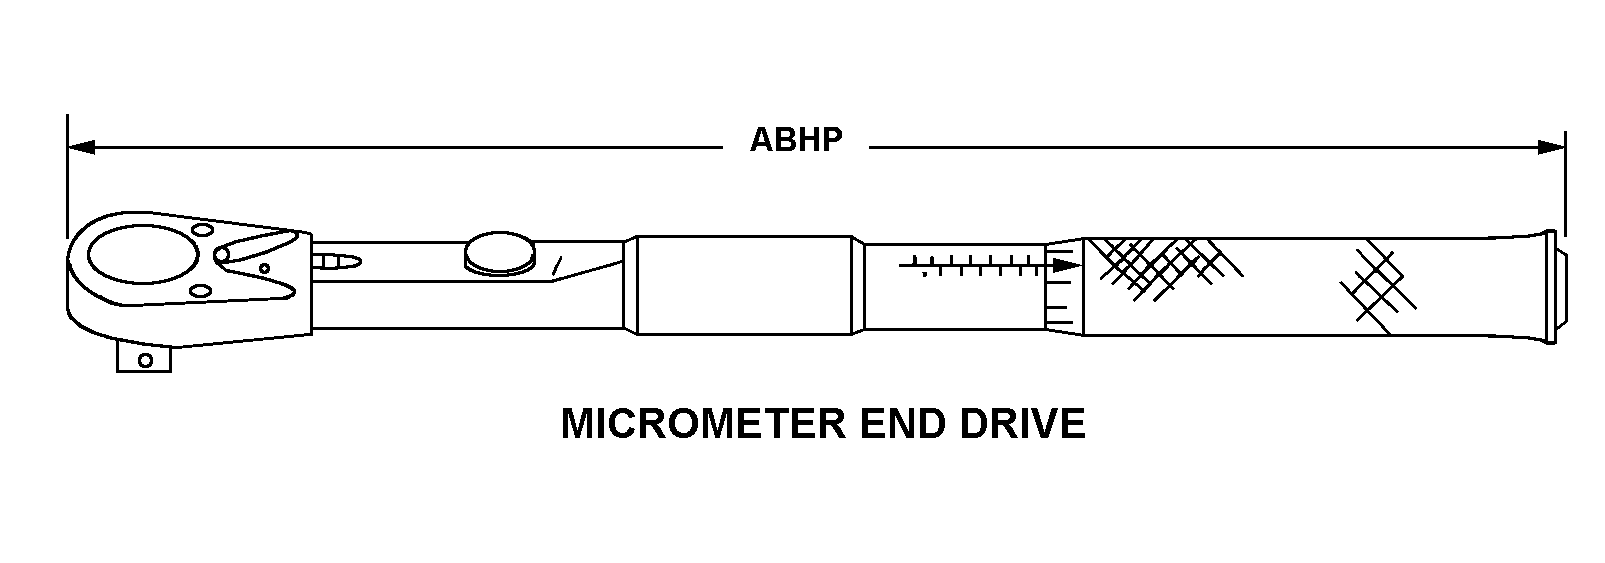 MICROMETER END DRIVE style nsn 5120-01-396-6071